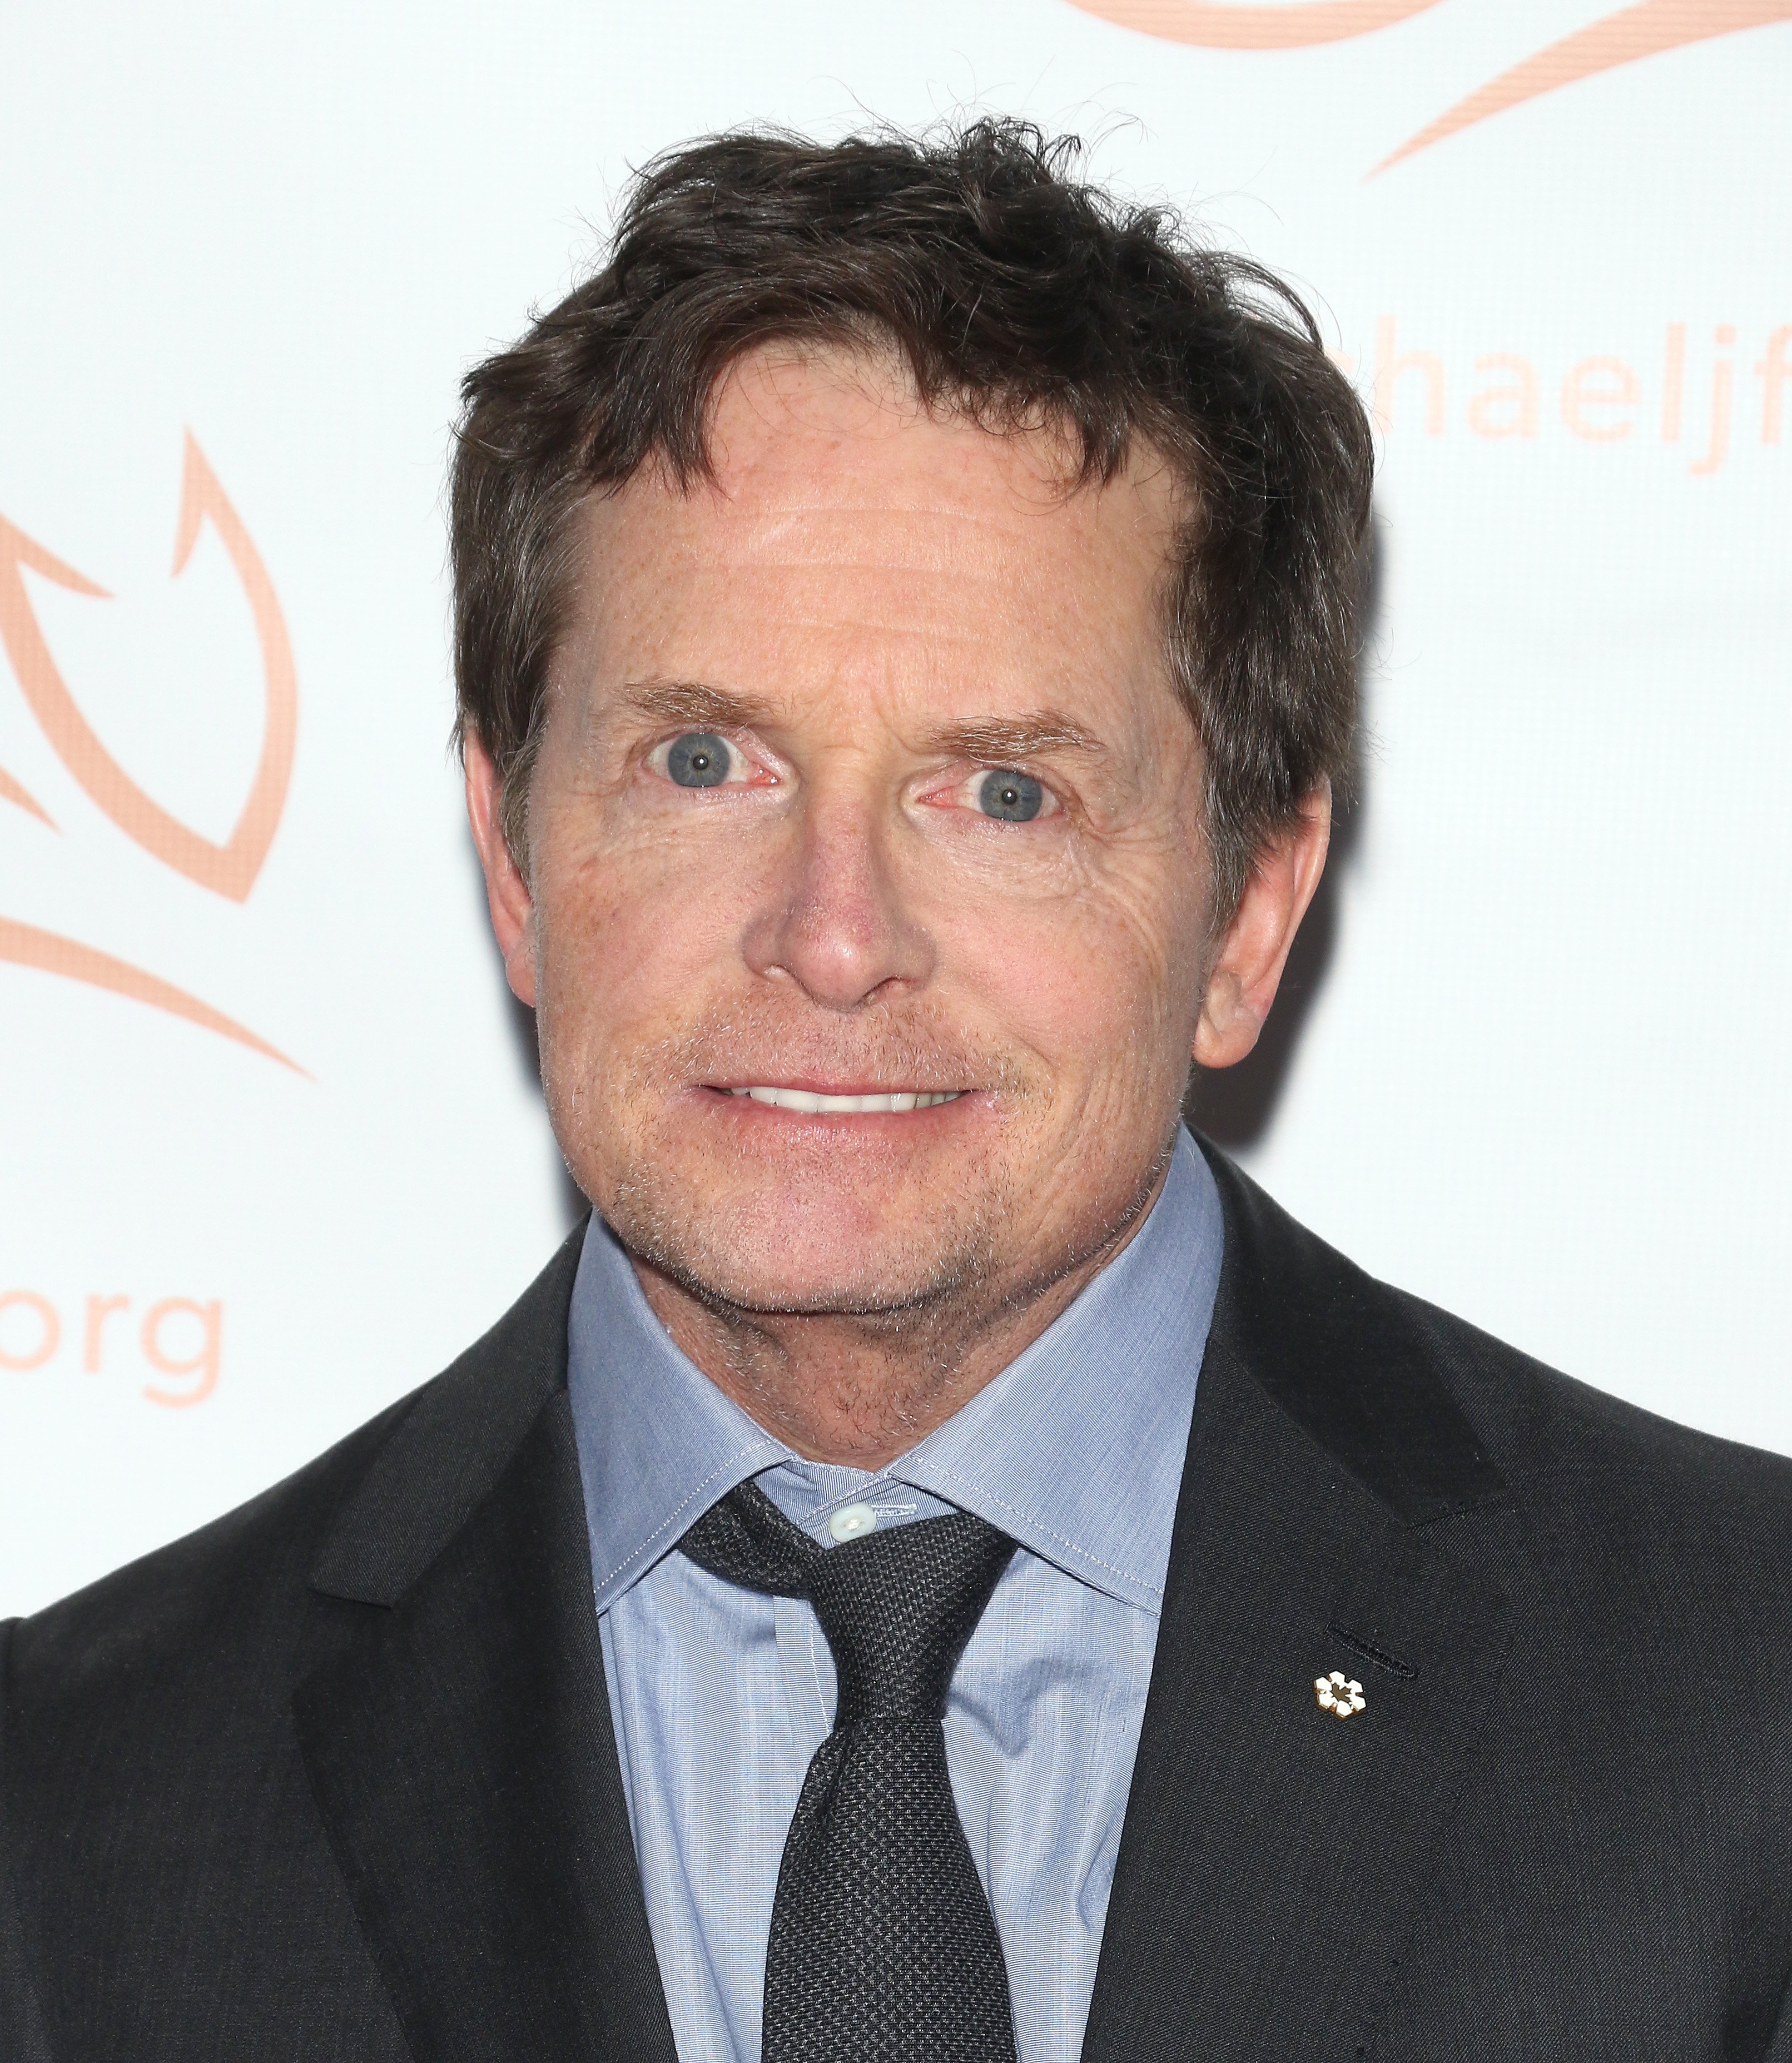 Michael J. Fox bei A Funny Thing Happened On The Way To Cure Parkinson's im Hilton New York am 16. November 2019 in New York City | Quelle: Getty Images